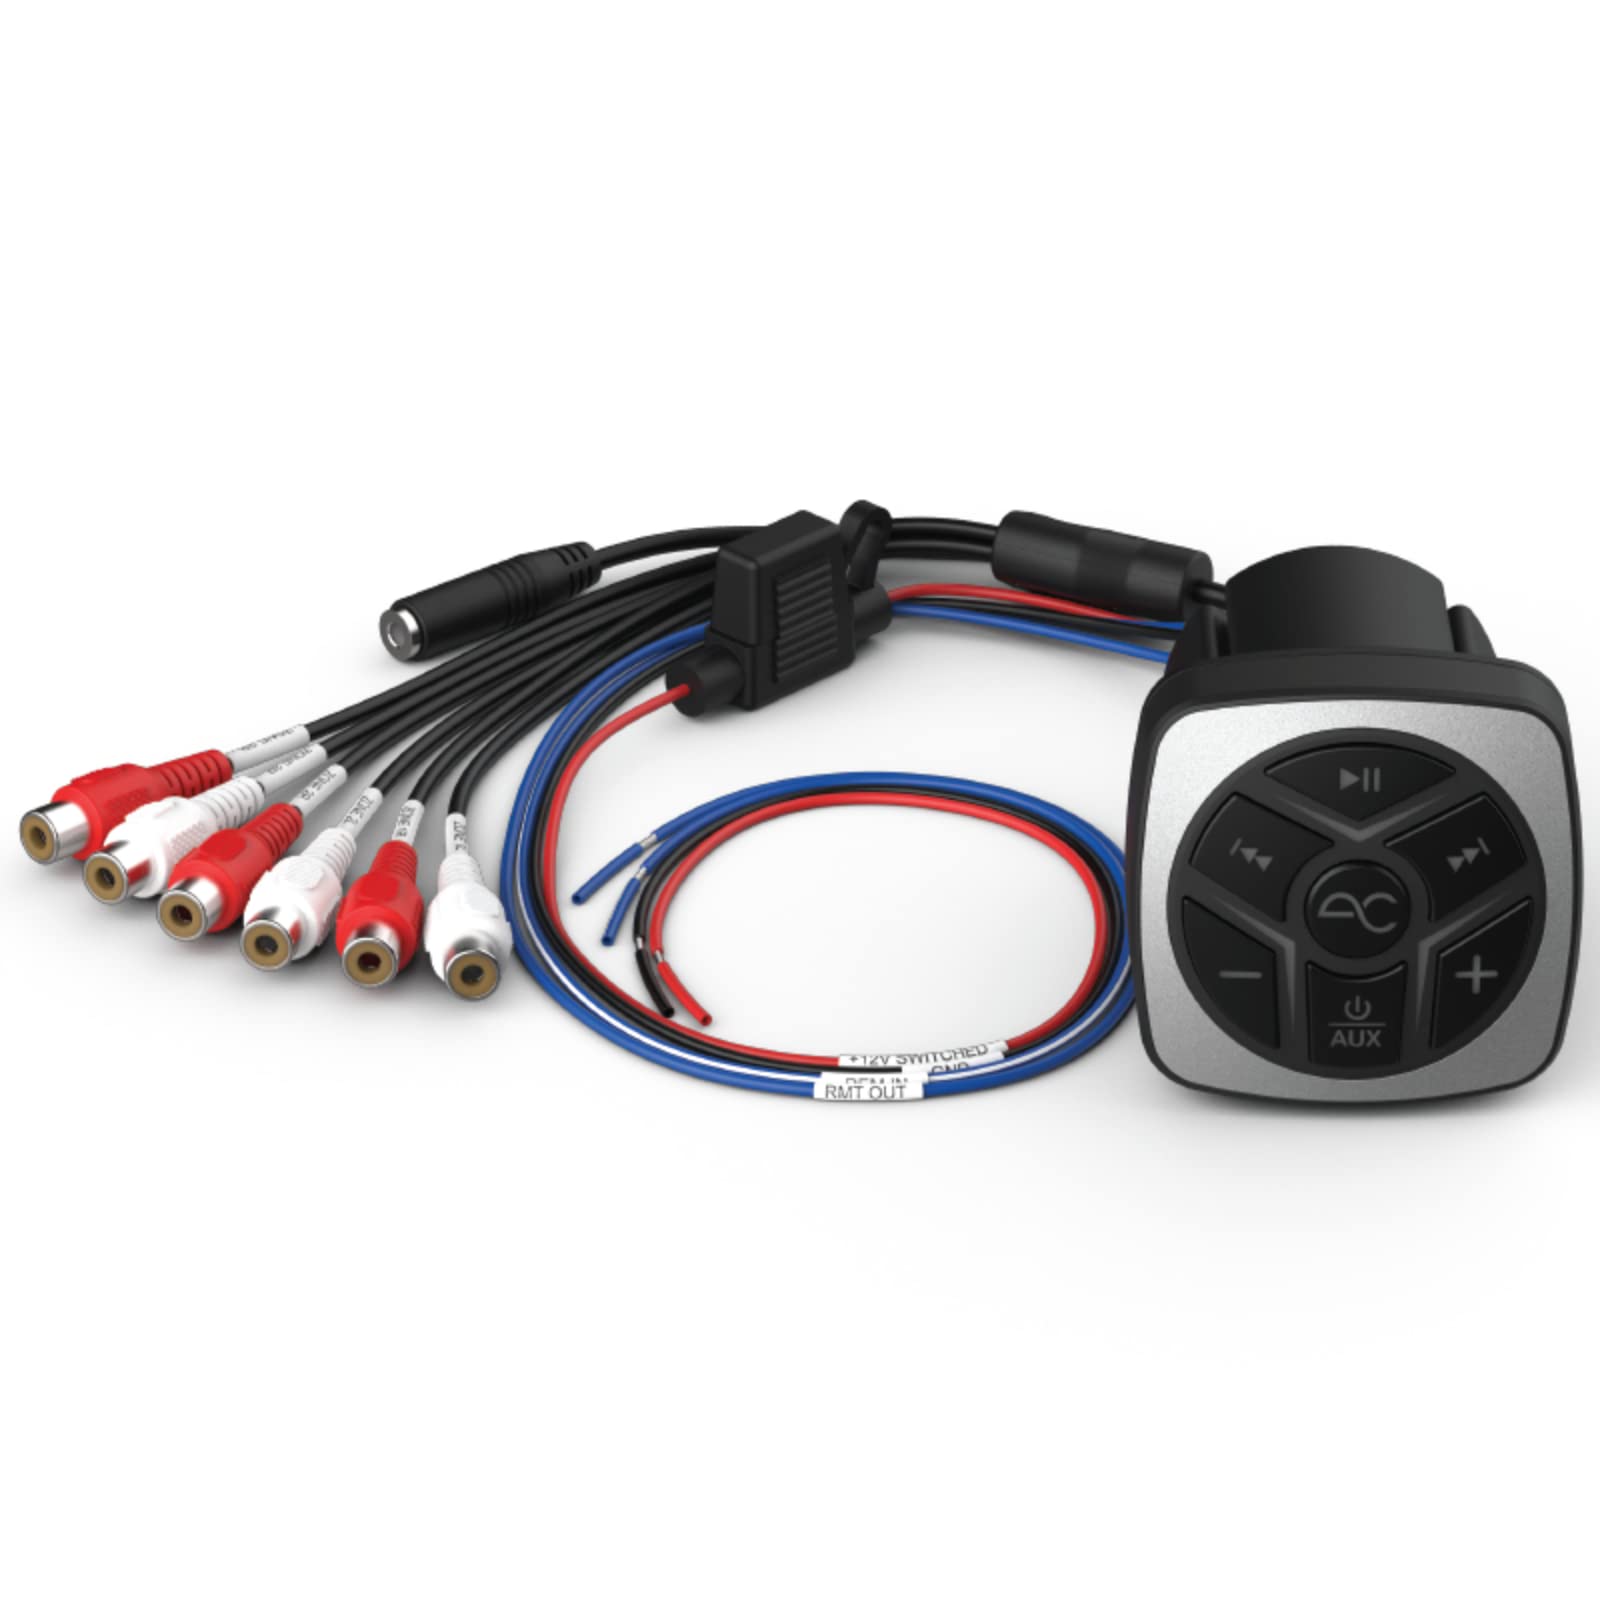 AudioControl All-Weather Bluetooth Controller and Streamer